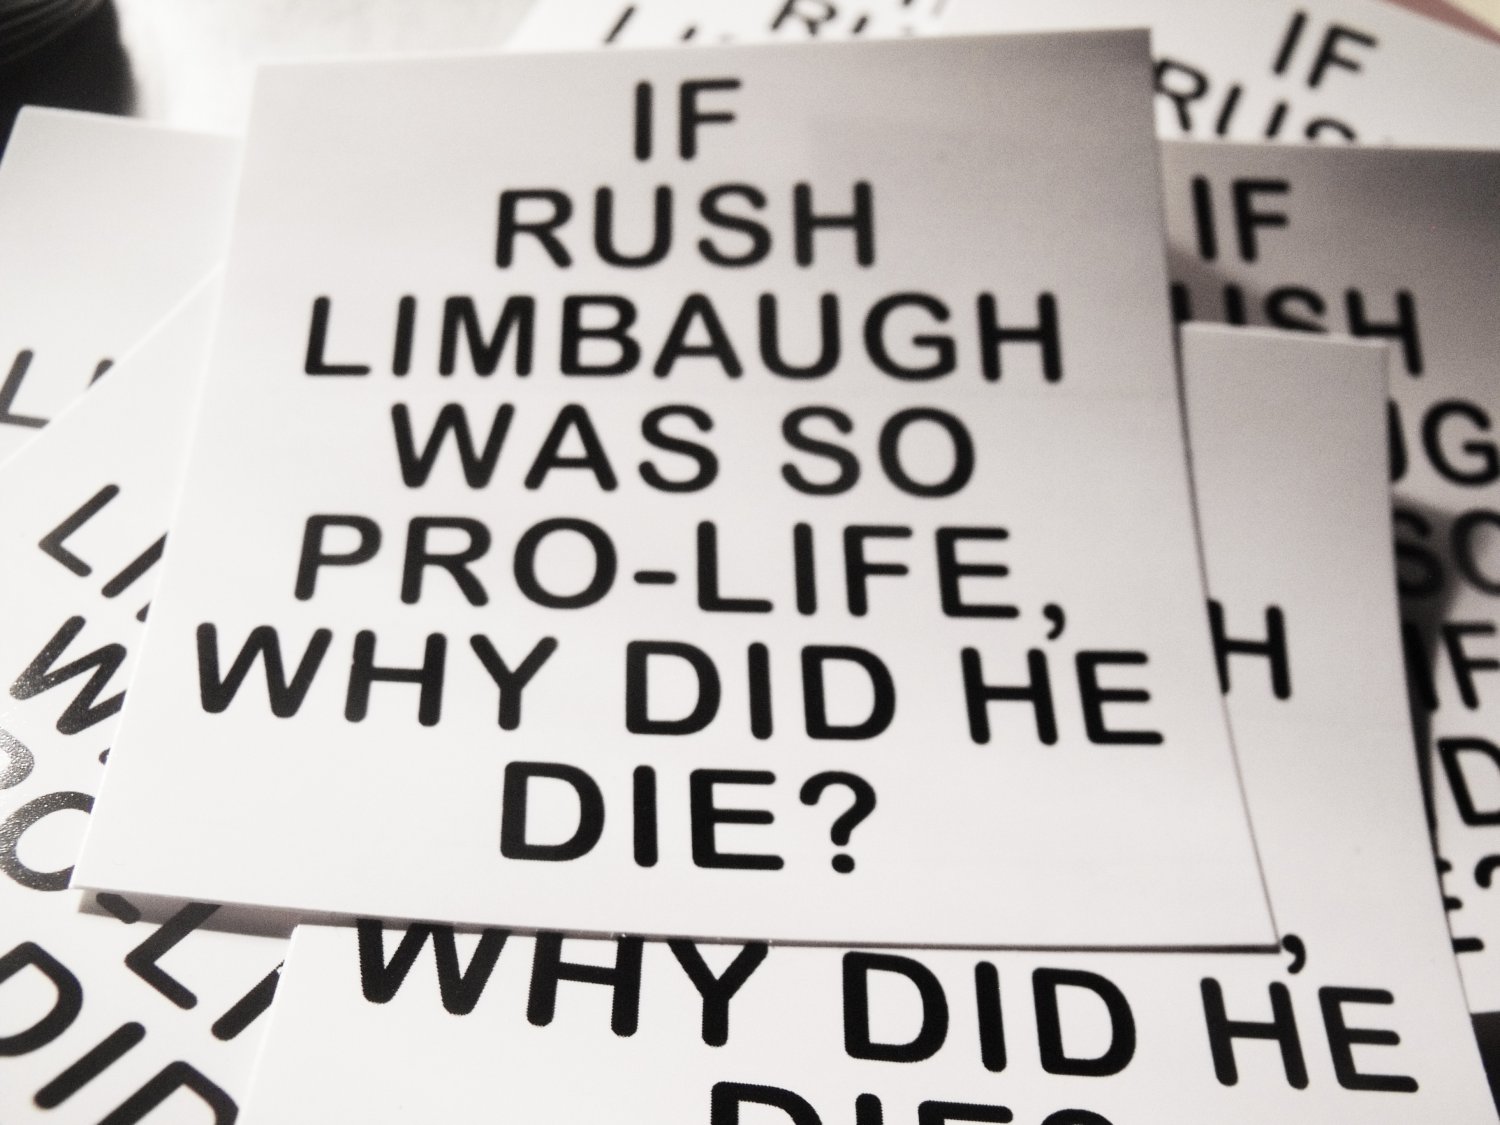 300  IF RUSH LIMBAUGH WAS SO PRO-LIFE, WHY DID HE DIE?  2.5" x 2.5"  stickers